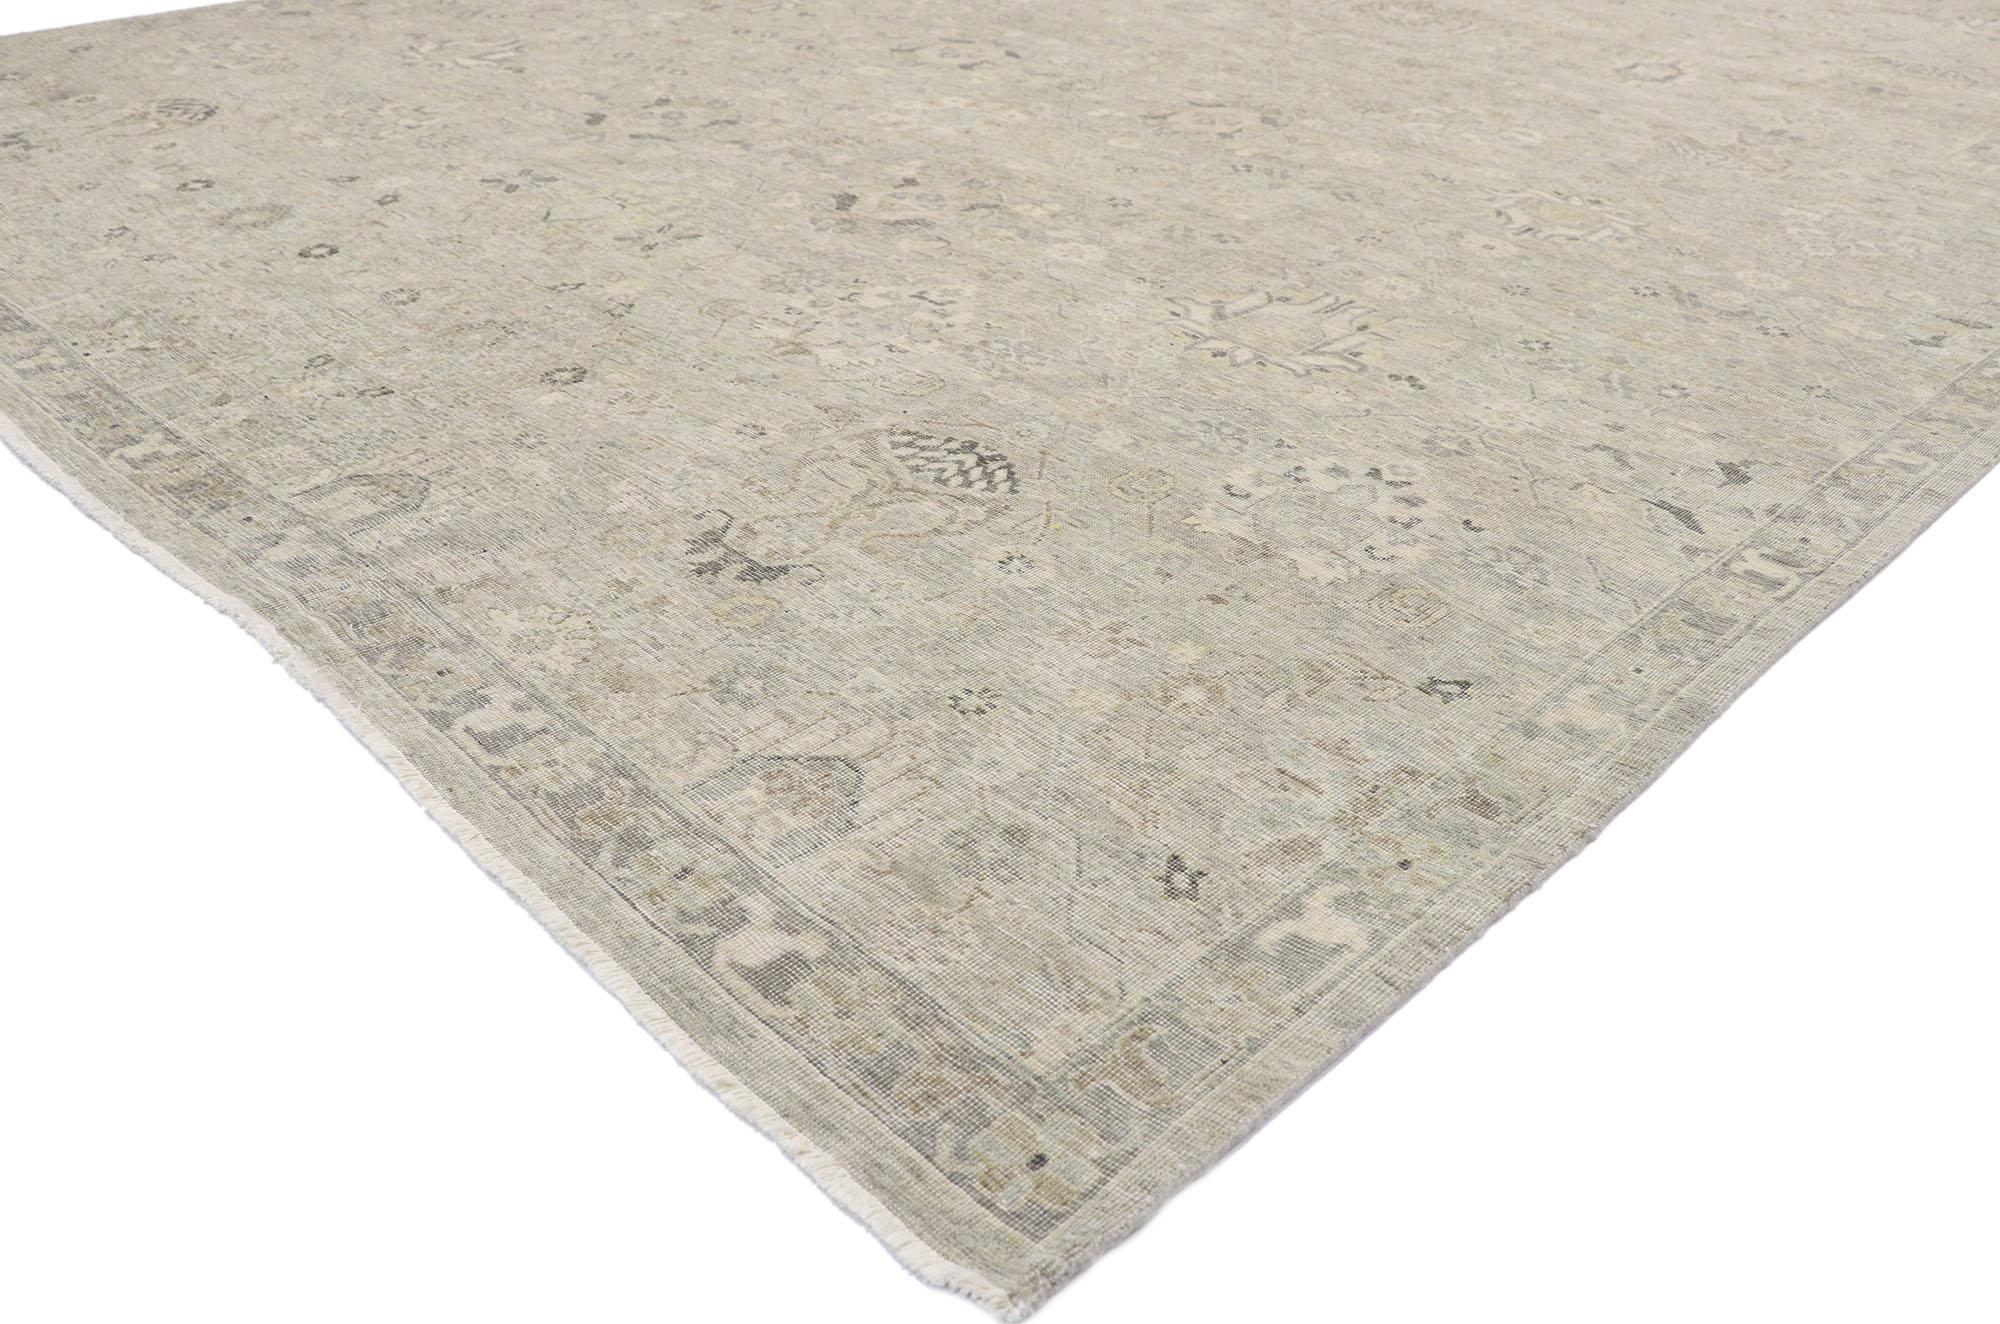 30619, new contemporary Oushak style rug with modern rustic Industrial style. With its neutral colors and weathered beauty combined with nostalgic charm, this new contemporary Oushak style rug creates an inimitable warmth and calming ambiance. The